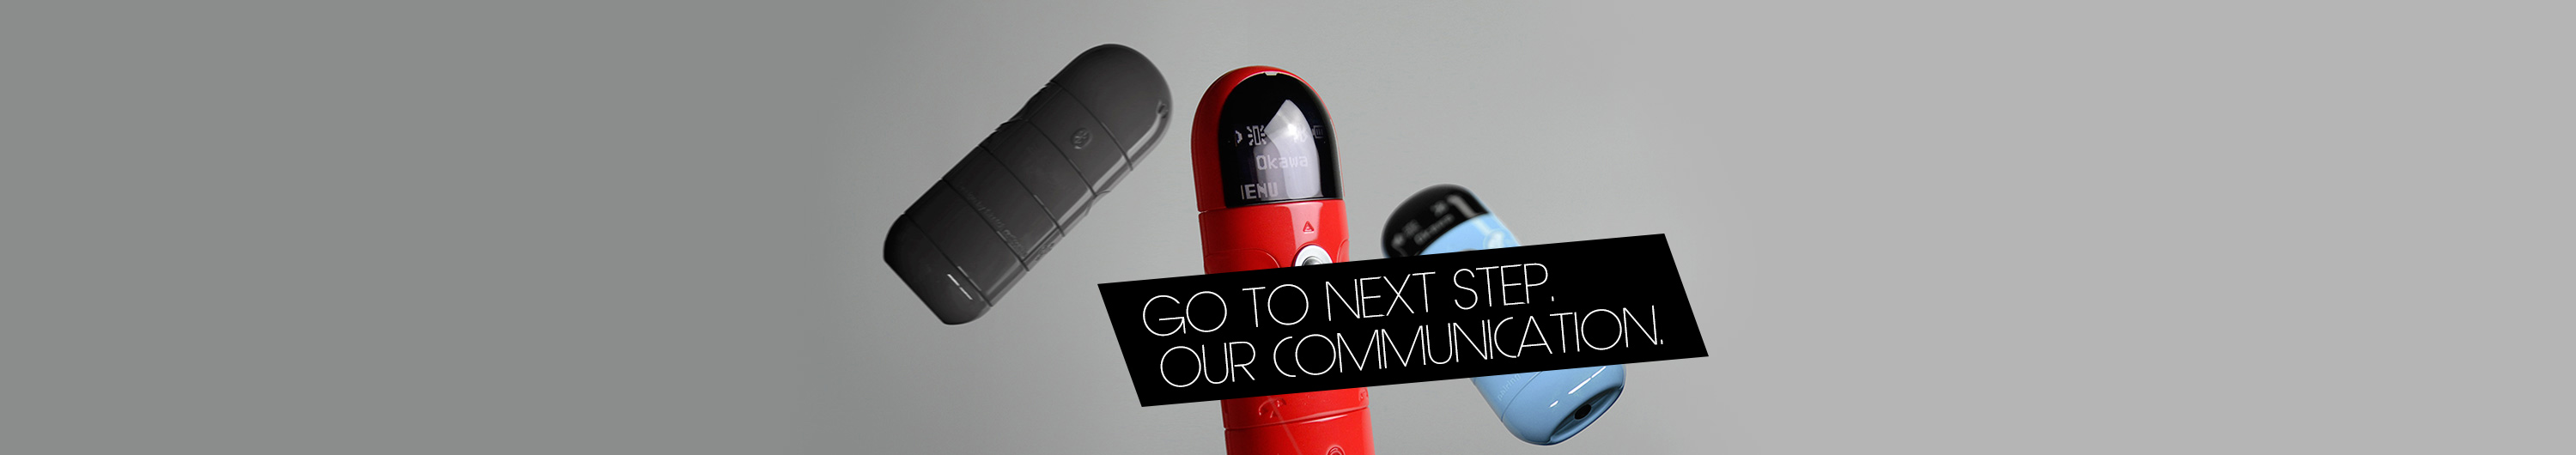 GO TO THE NEXT STEP. OUR COMMUNICATION.